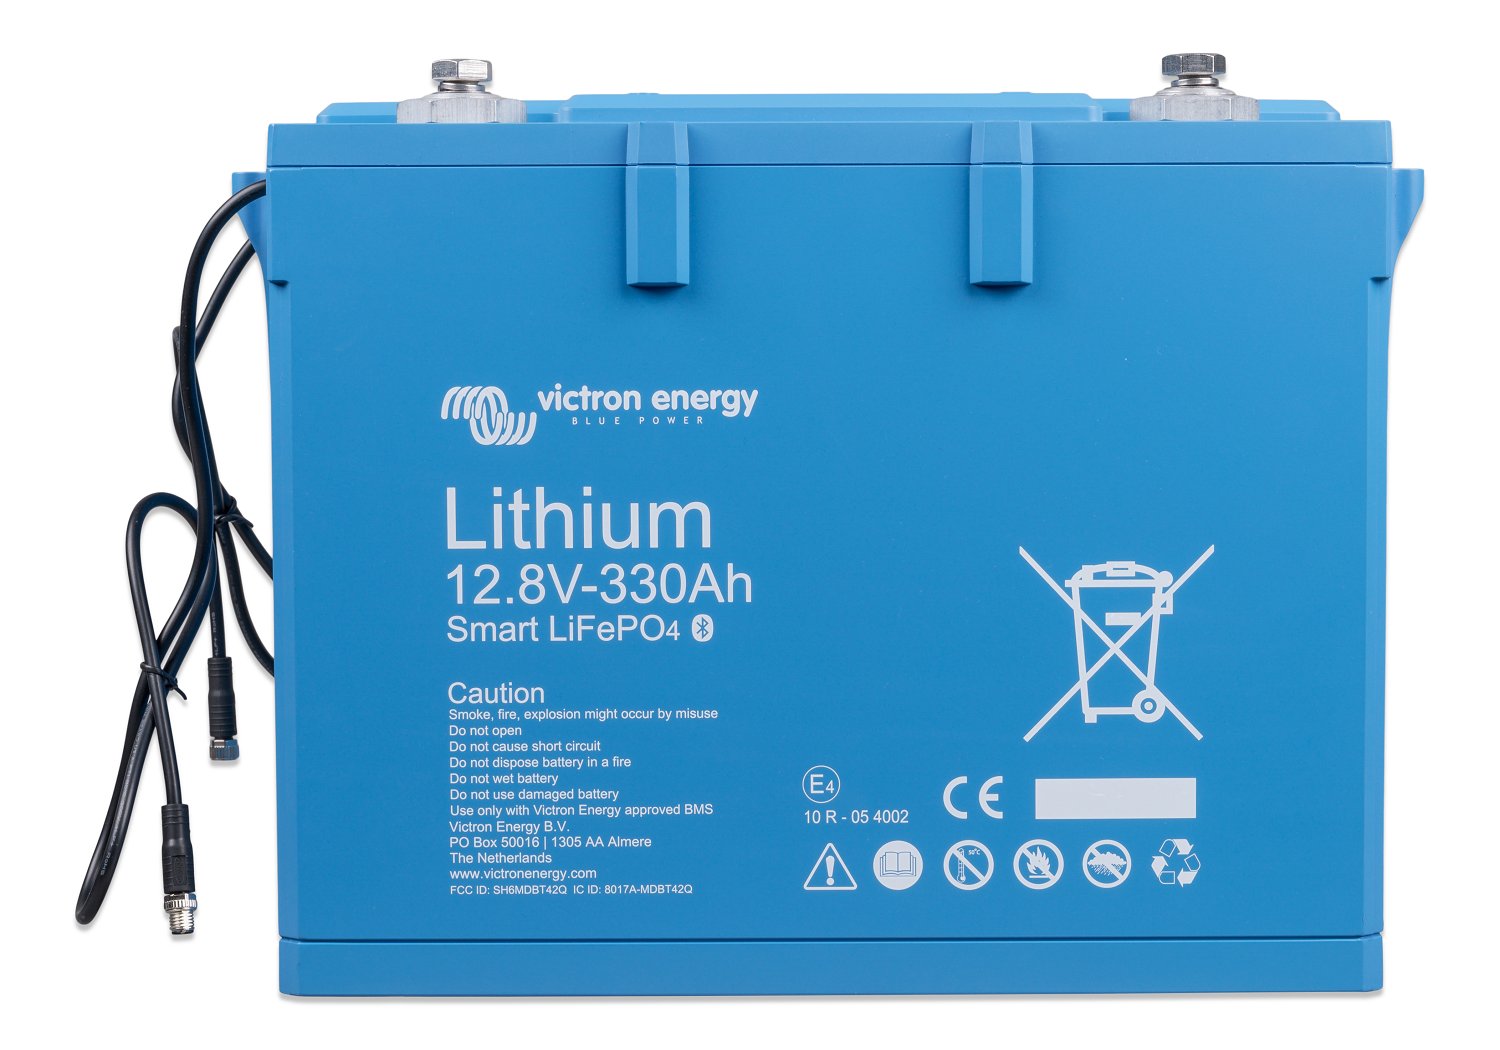 How long is the cycle life of the Victron Smart Lithium 330 amp hour BAT512132410 battery?